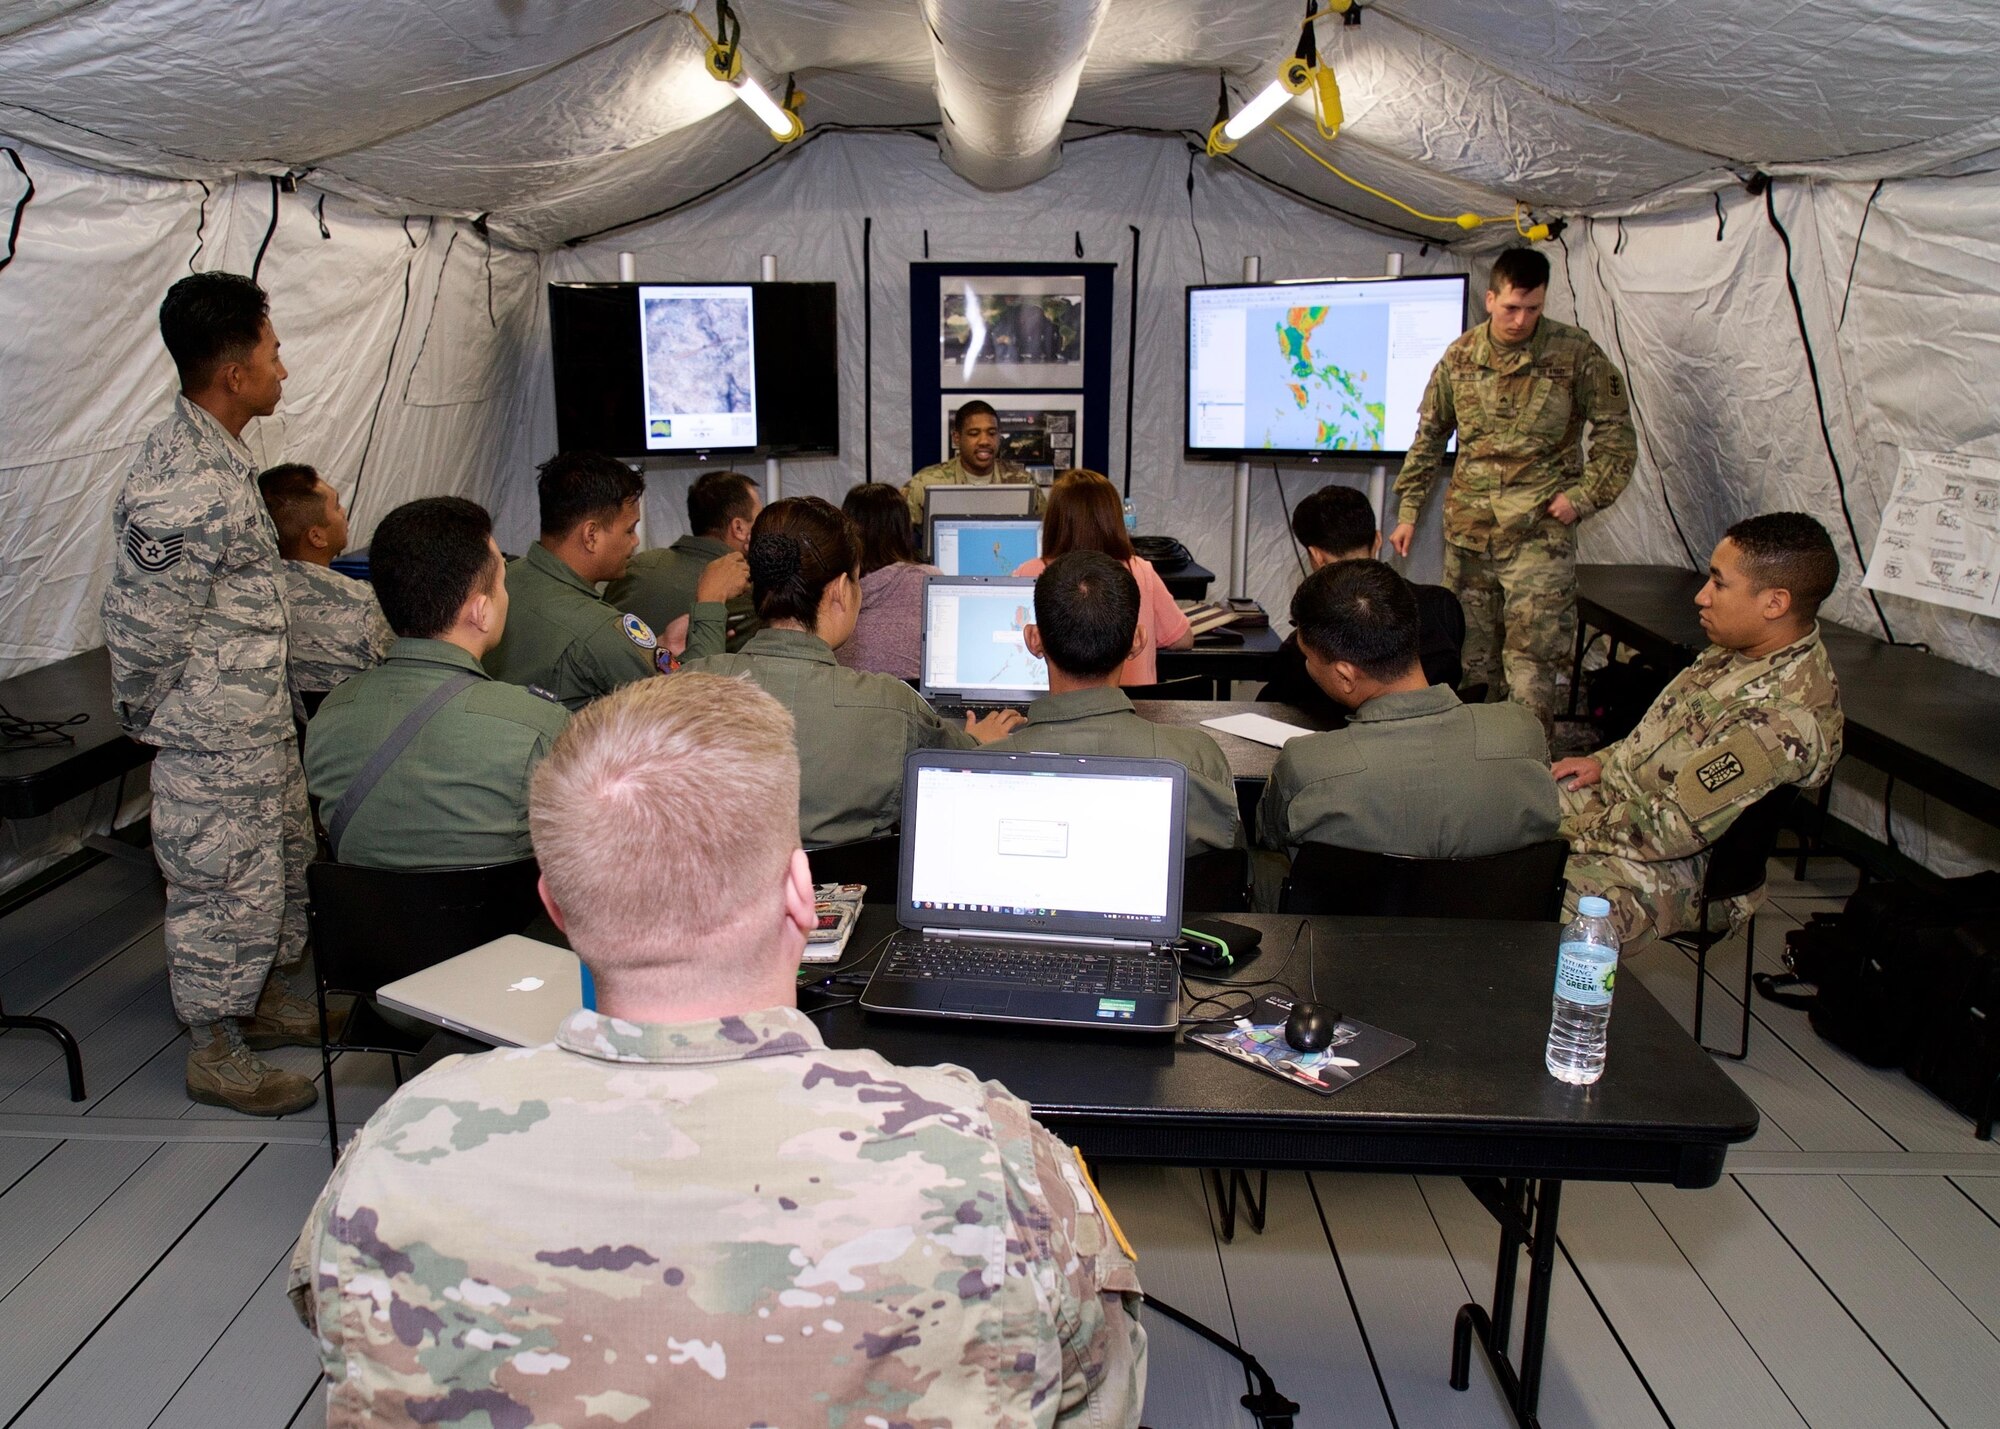 A combined group of Philippine and U.S. service members follow Spc. Antonio Martin, a geospatial engineer with the U.S. Army's 5th Engineer Detachment Geospatial Planning Cell, while he demonstrates techniques for layering map products, Clark Air Base, Philippines, Jan. 20, 2017. The group is participating in a two-week long Subject Matter Expert Exchange (SMEE). Throughout the SMEE military members from both nations will train together using satellite imagery to enhance their combined readiness when conducting Humanitarian Assistance and Disaster Relief operaions common in the Asia-Pacific. (U.S. Air Force photo by Tech. Sgt. James Stewart/Released)